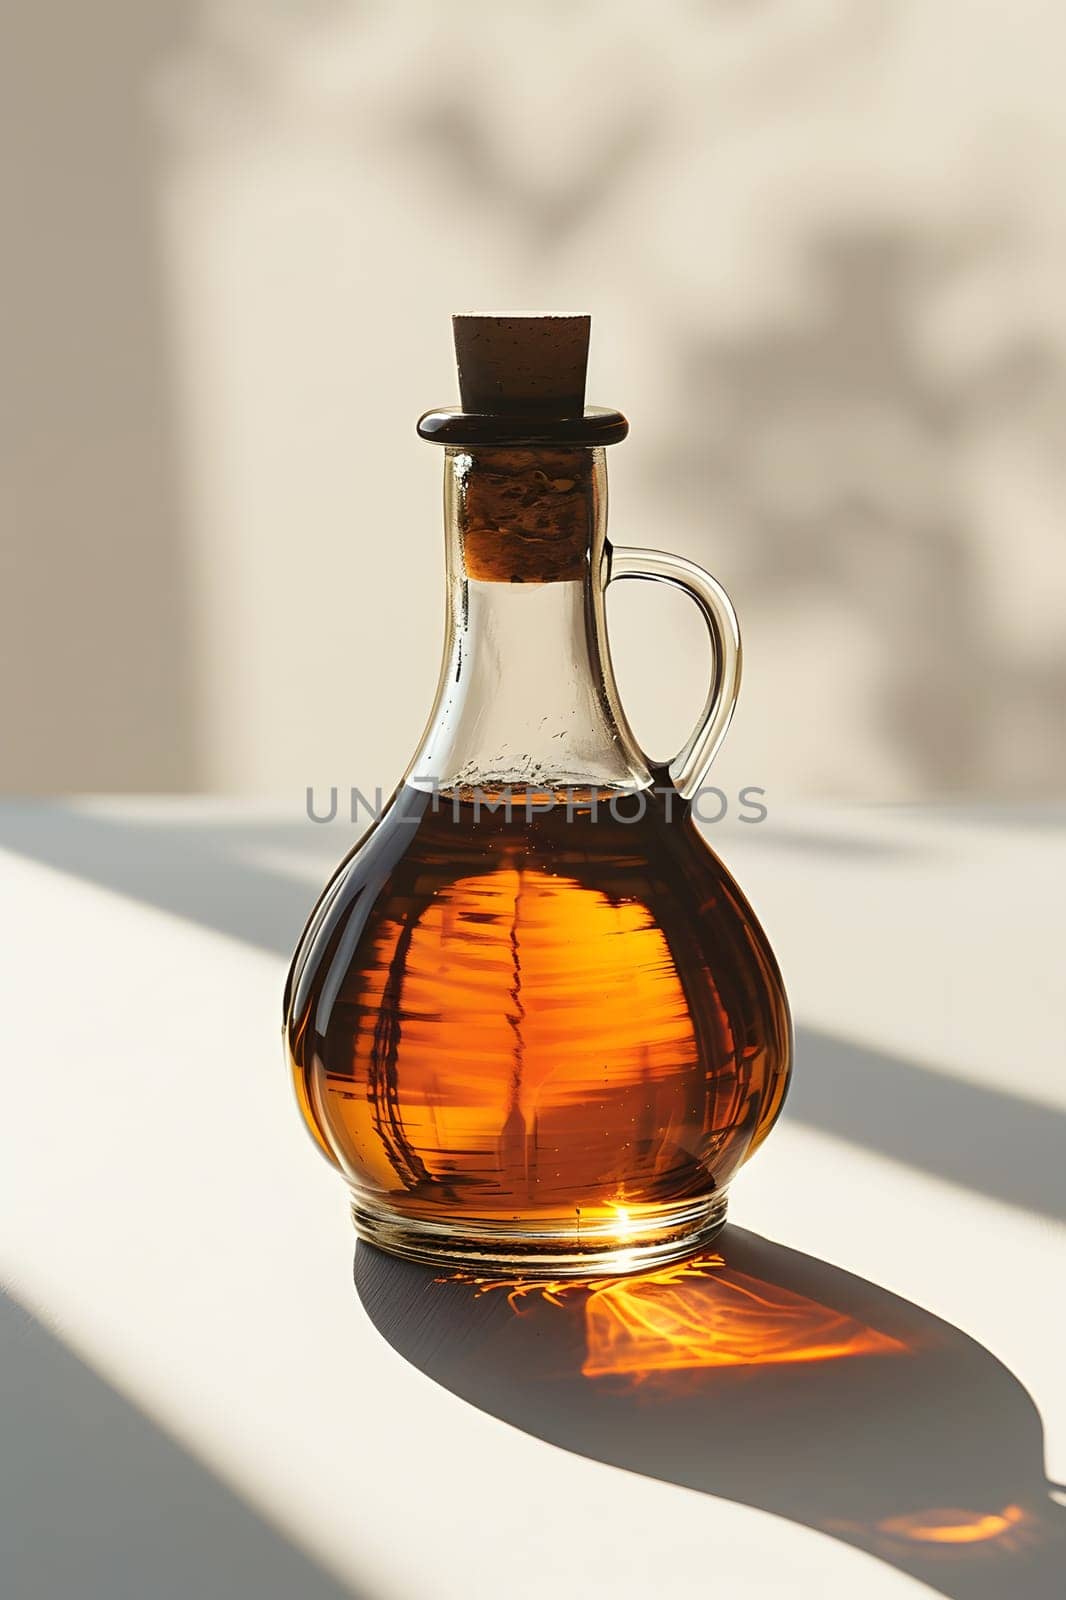 An amber liquid solution of maple syrup is contained in a glass bottle with a stopper on a table, ready to be used as a sweet addition to meals or drinks